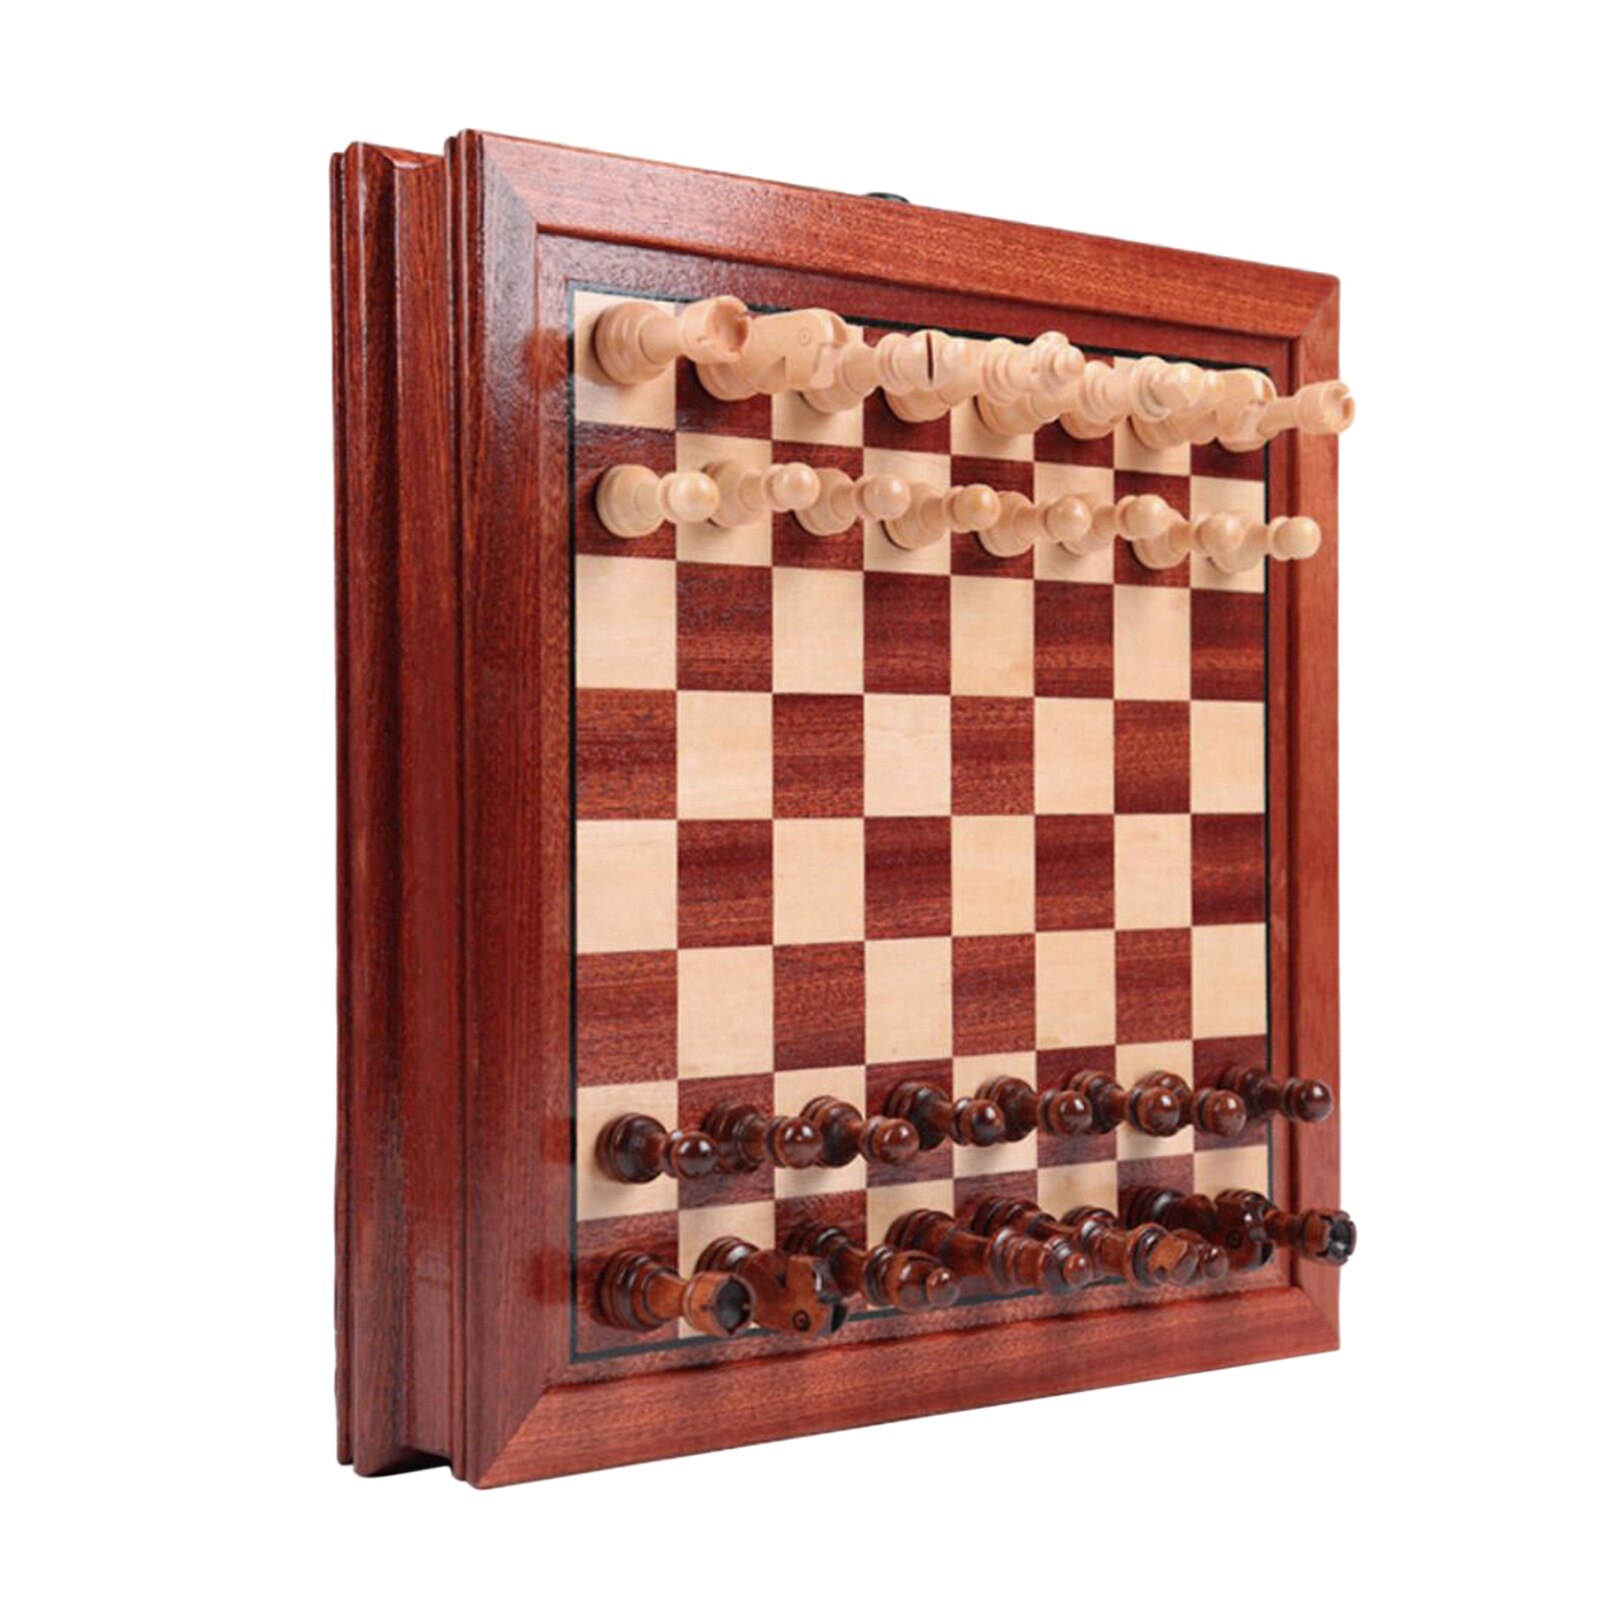 Classic Wooden Chessboard Puzzle Chess Board Game Teenager Adult Birthday Family Board Game